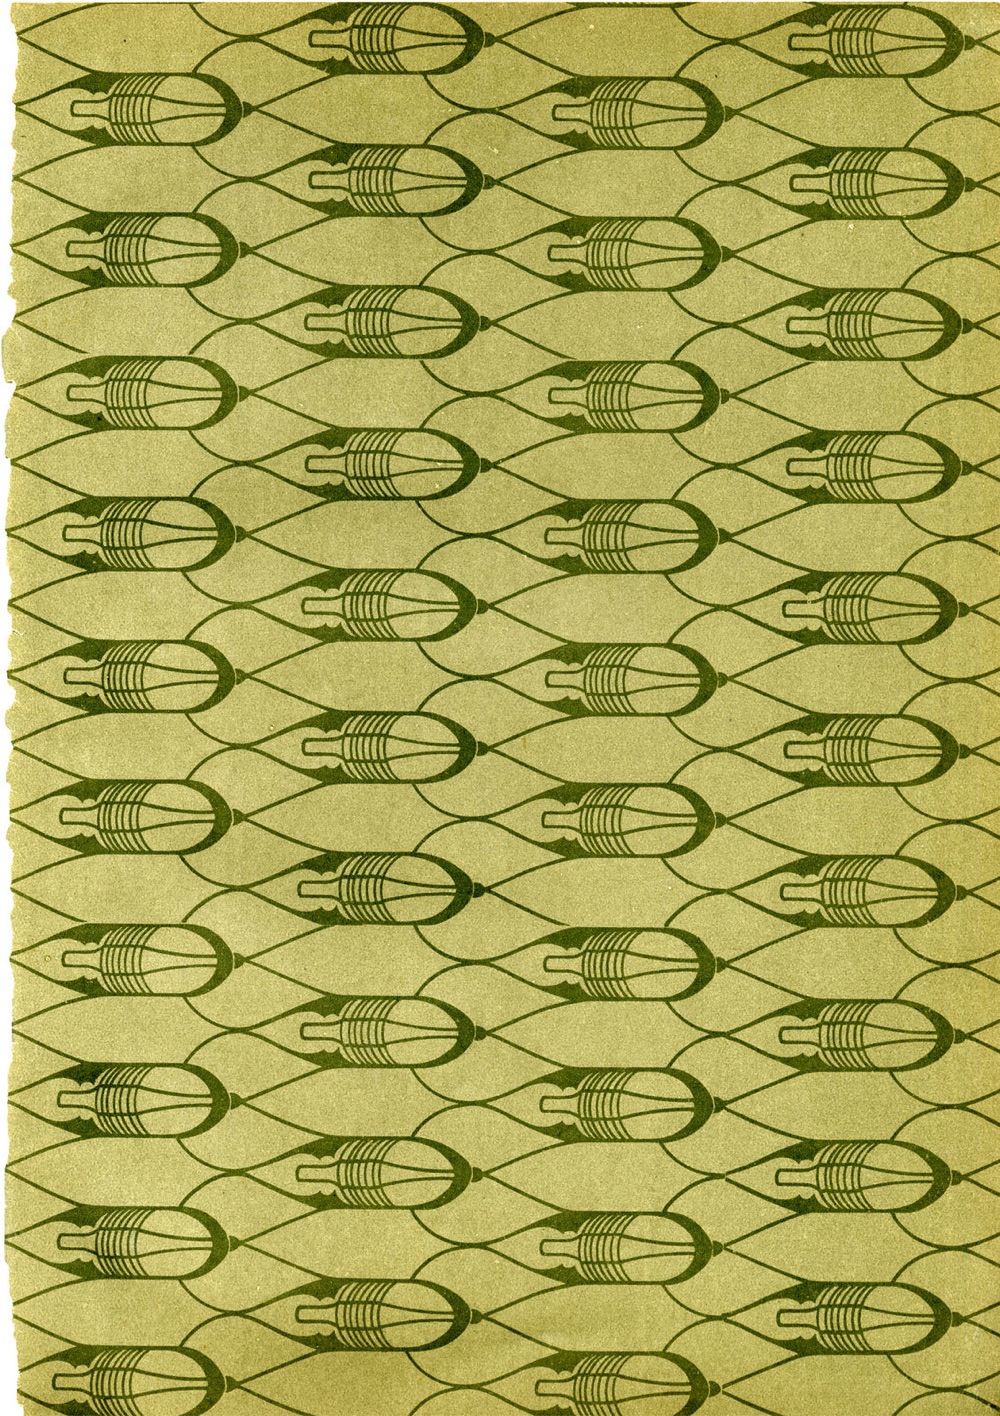 a pattern of dark green shapes on a light green background